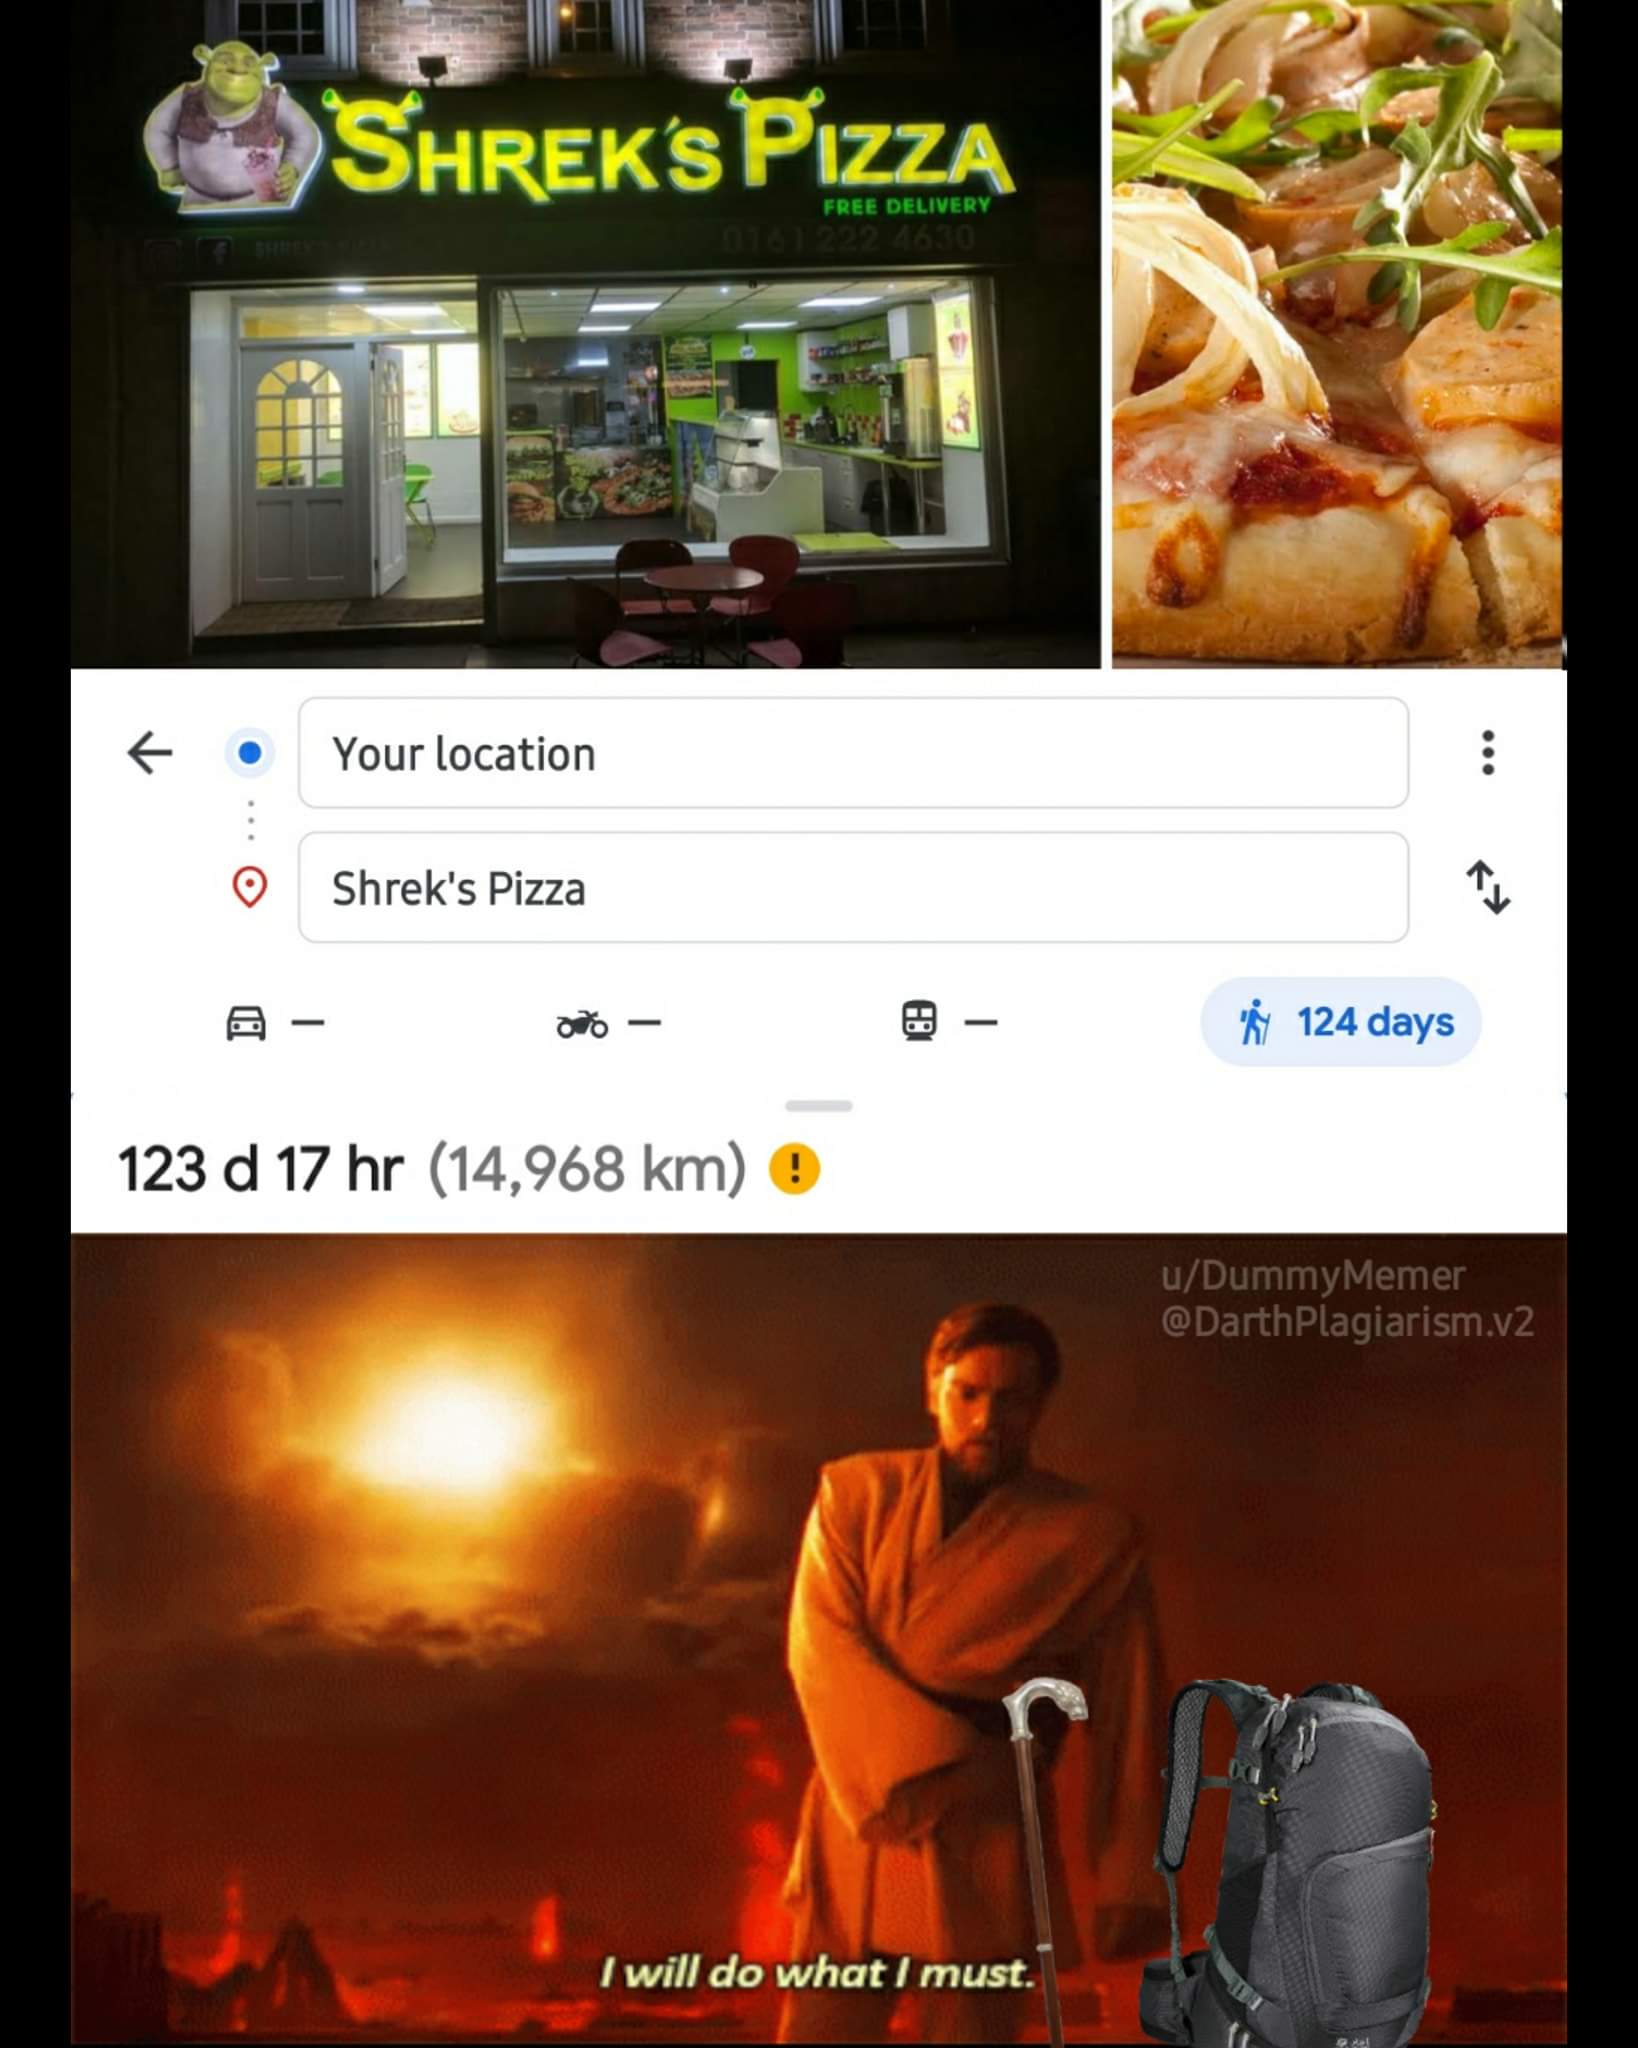 poster - Shrek'S Pizza Free Delivery 022630 Your location O Shrek's Pizza Ho " 124 days 123 d 17 hr 14,968 km ! uDummyMemer .v2 I will do what I must.